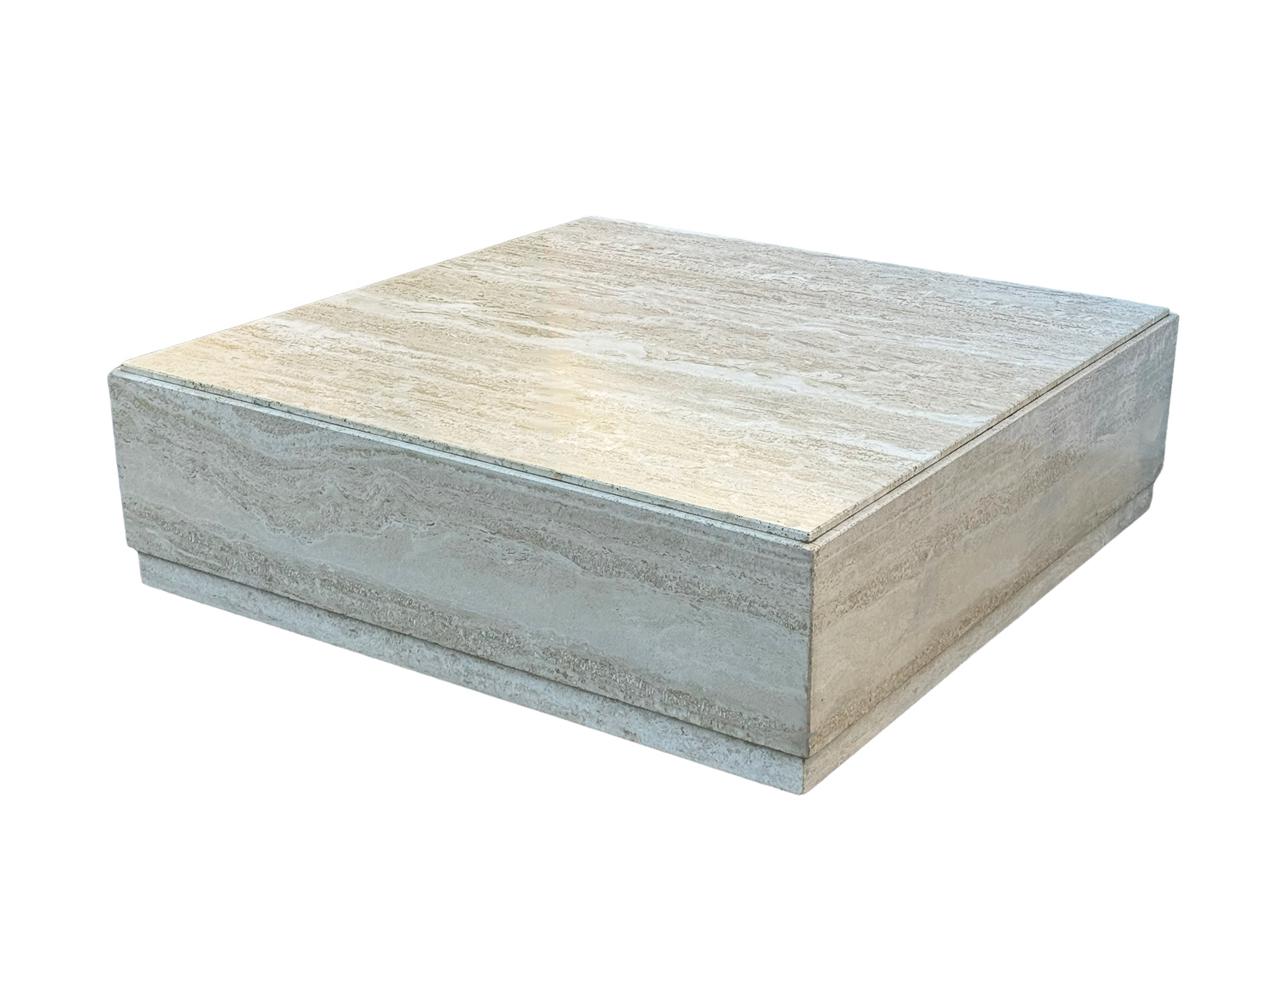 Low Midcentury Italian Modern Square Travertine Marble Cube Cocktail Table  For Sale 3